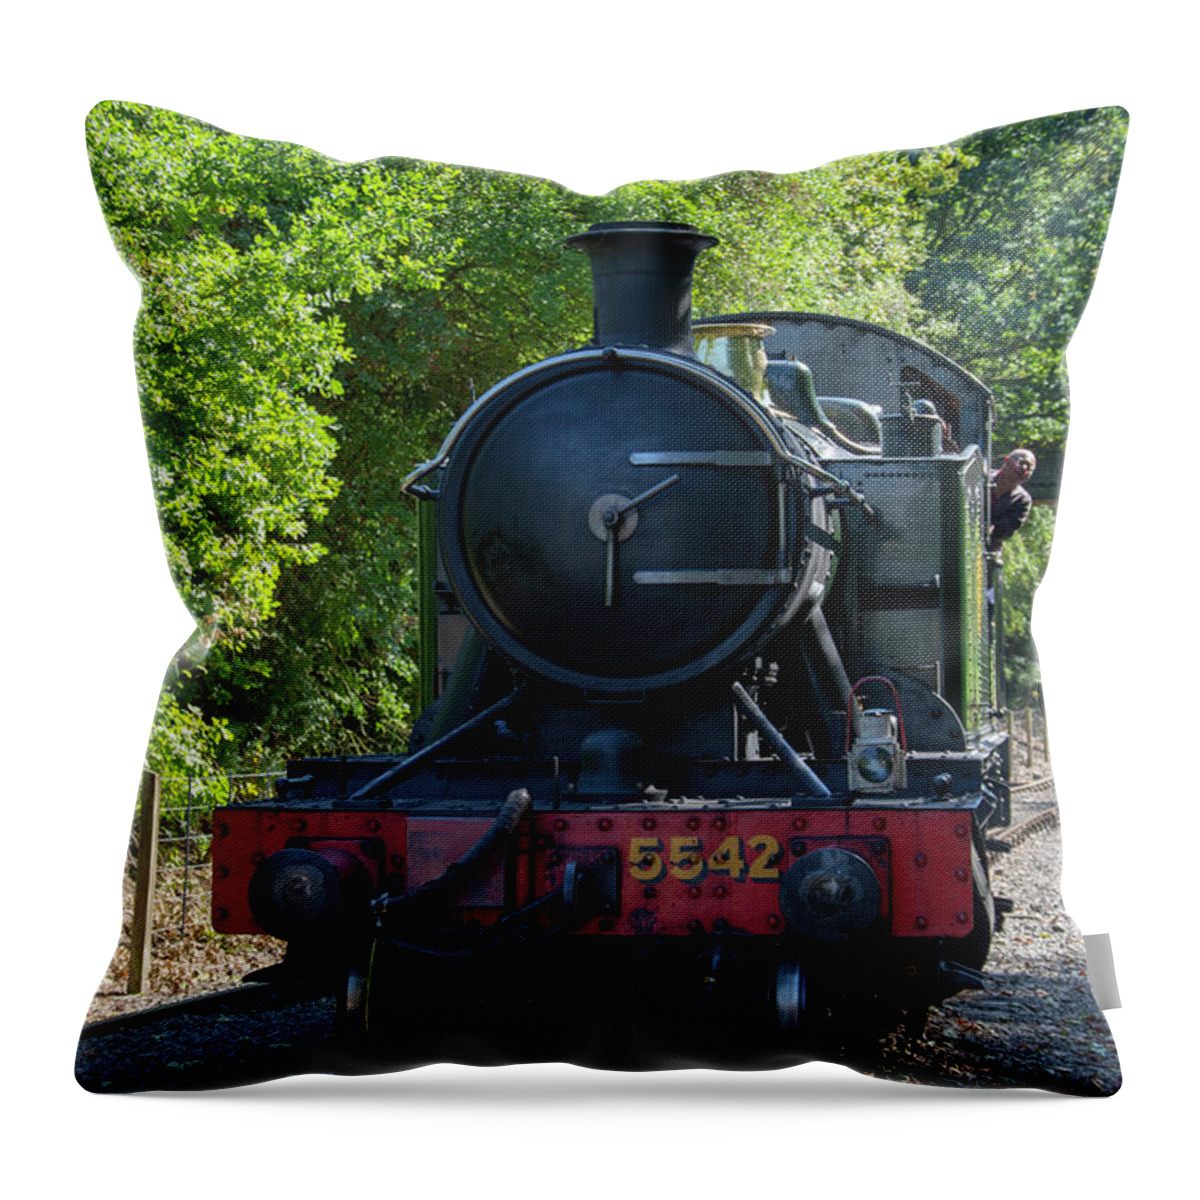 Small Prairie Throw Pillow featuring the photograph 5542 On The The Points by Steev Stamford